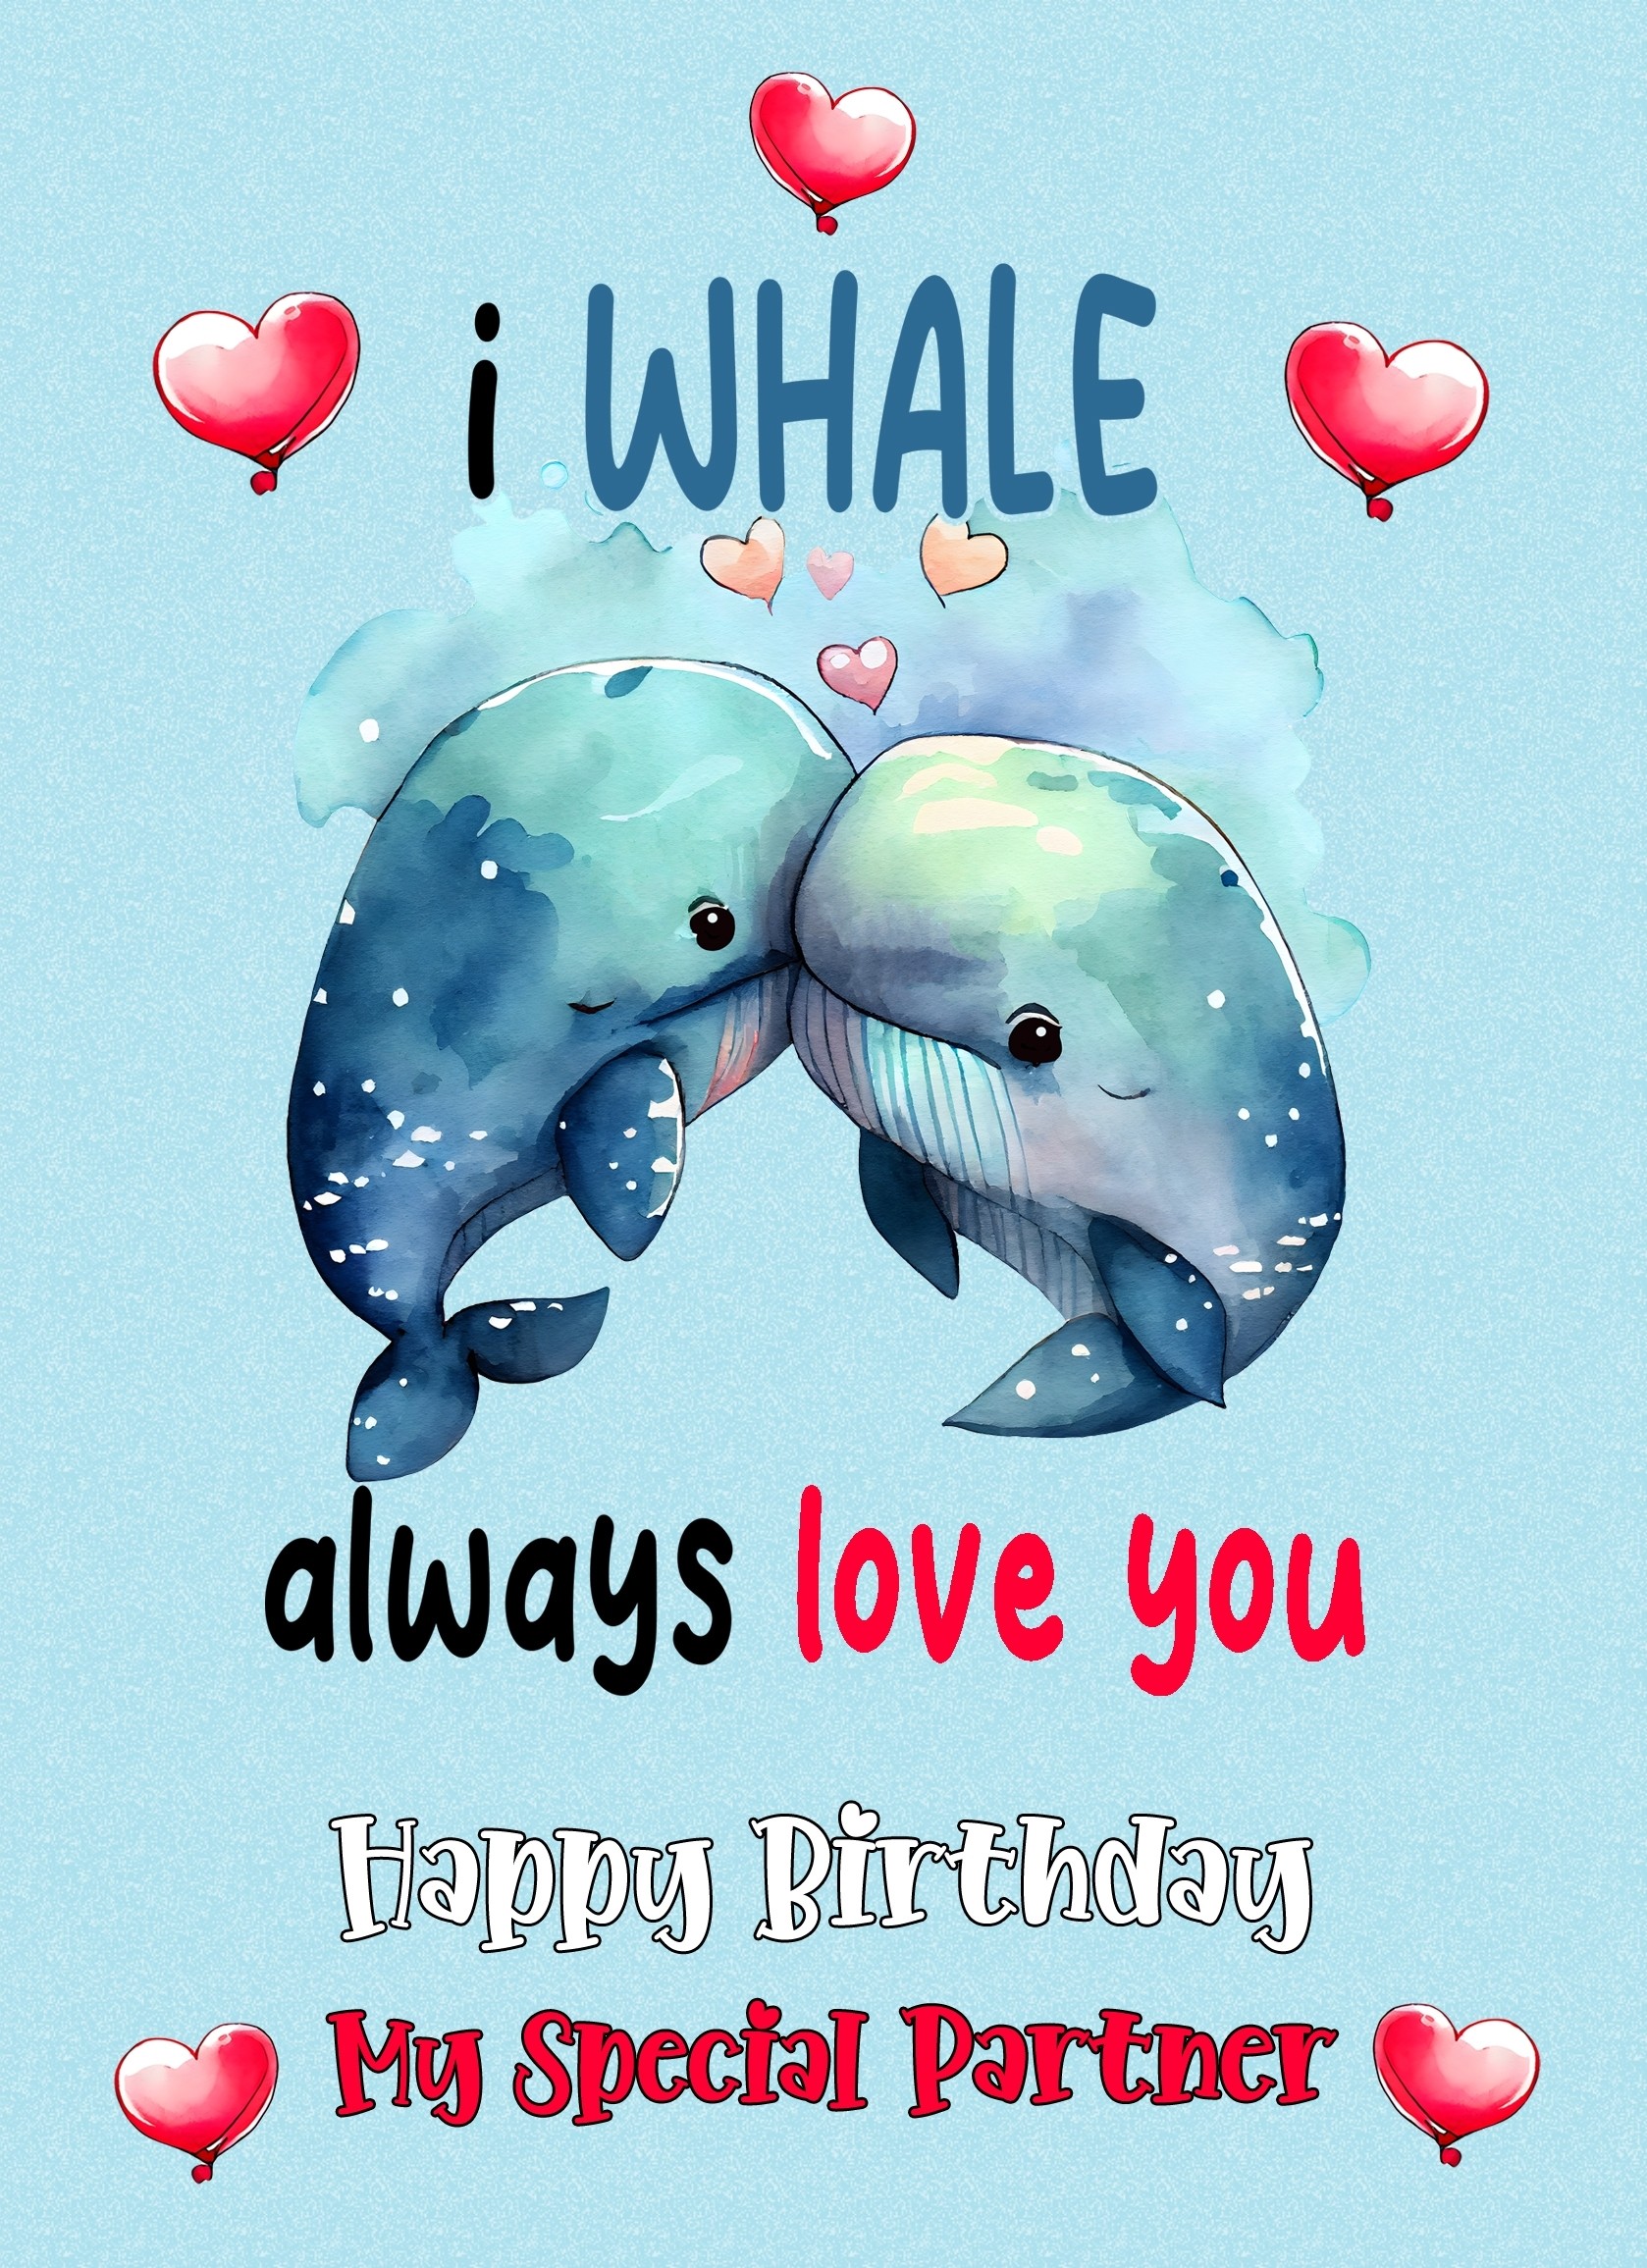 Funny Pun Romantic Birthday Card for Partner (Whale)